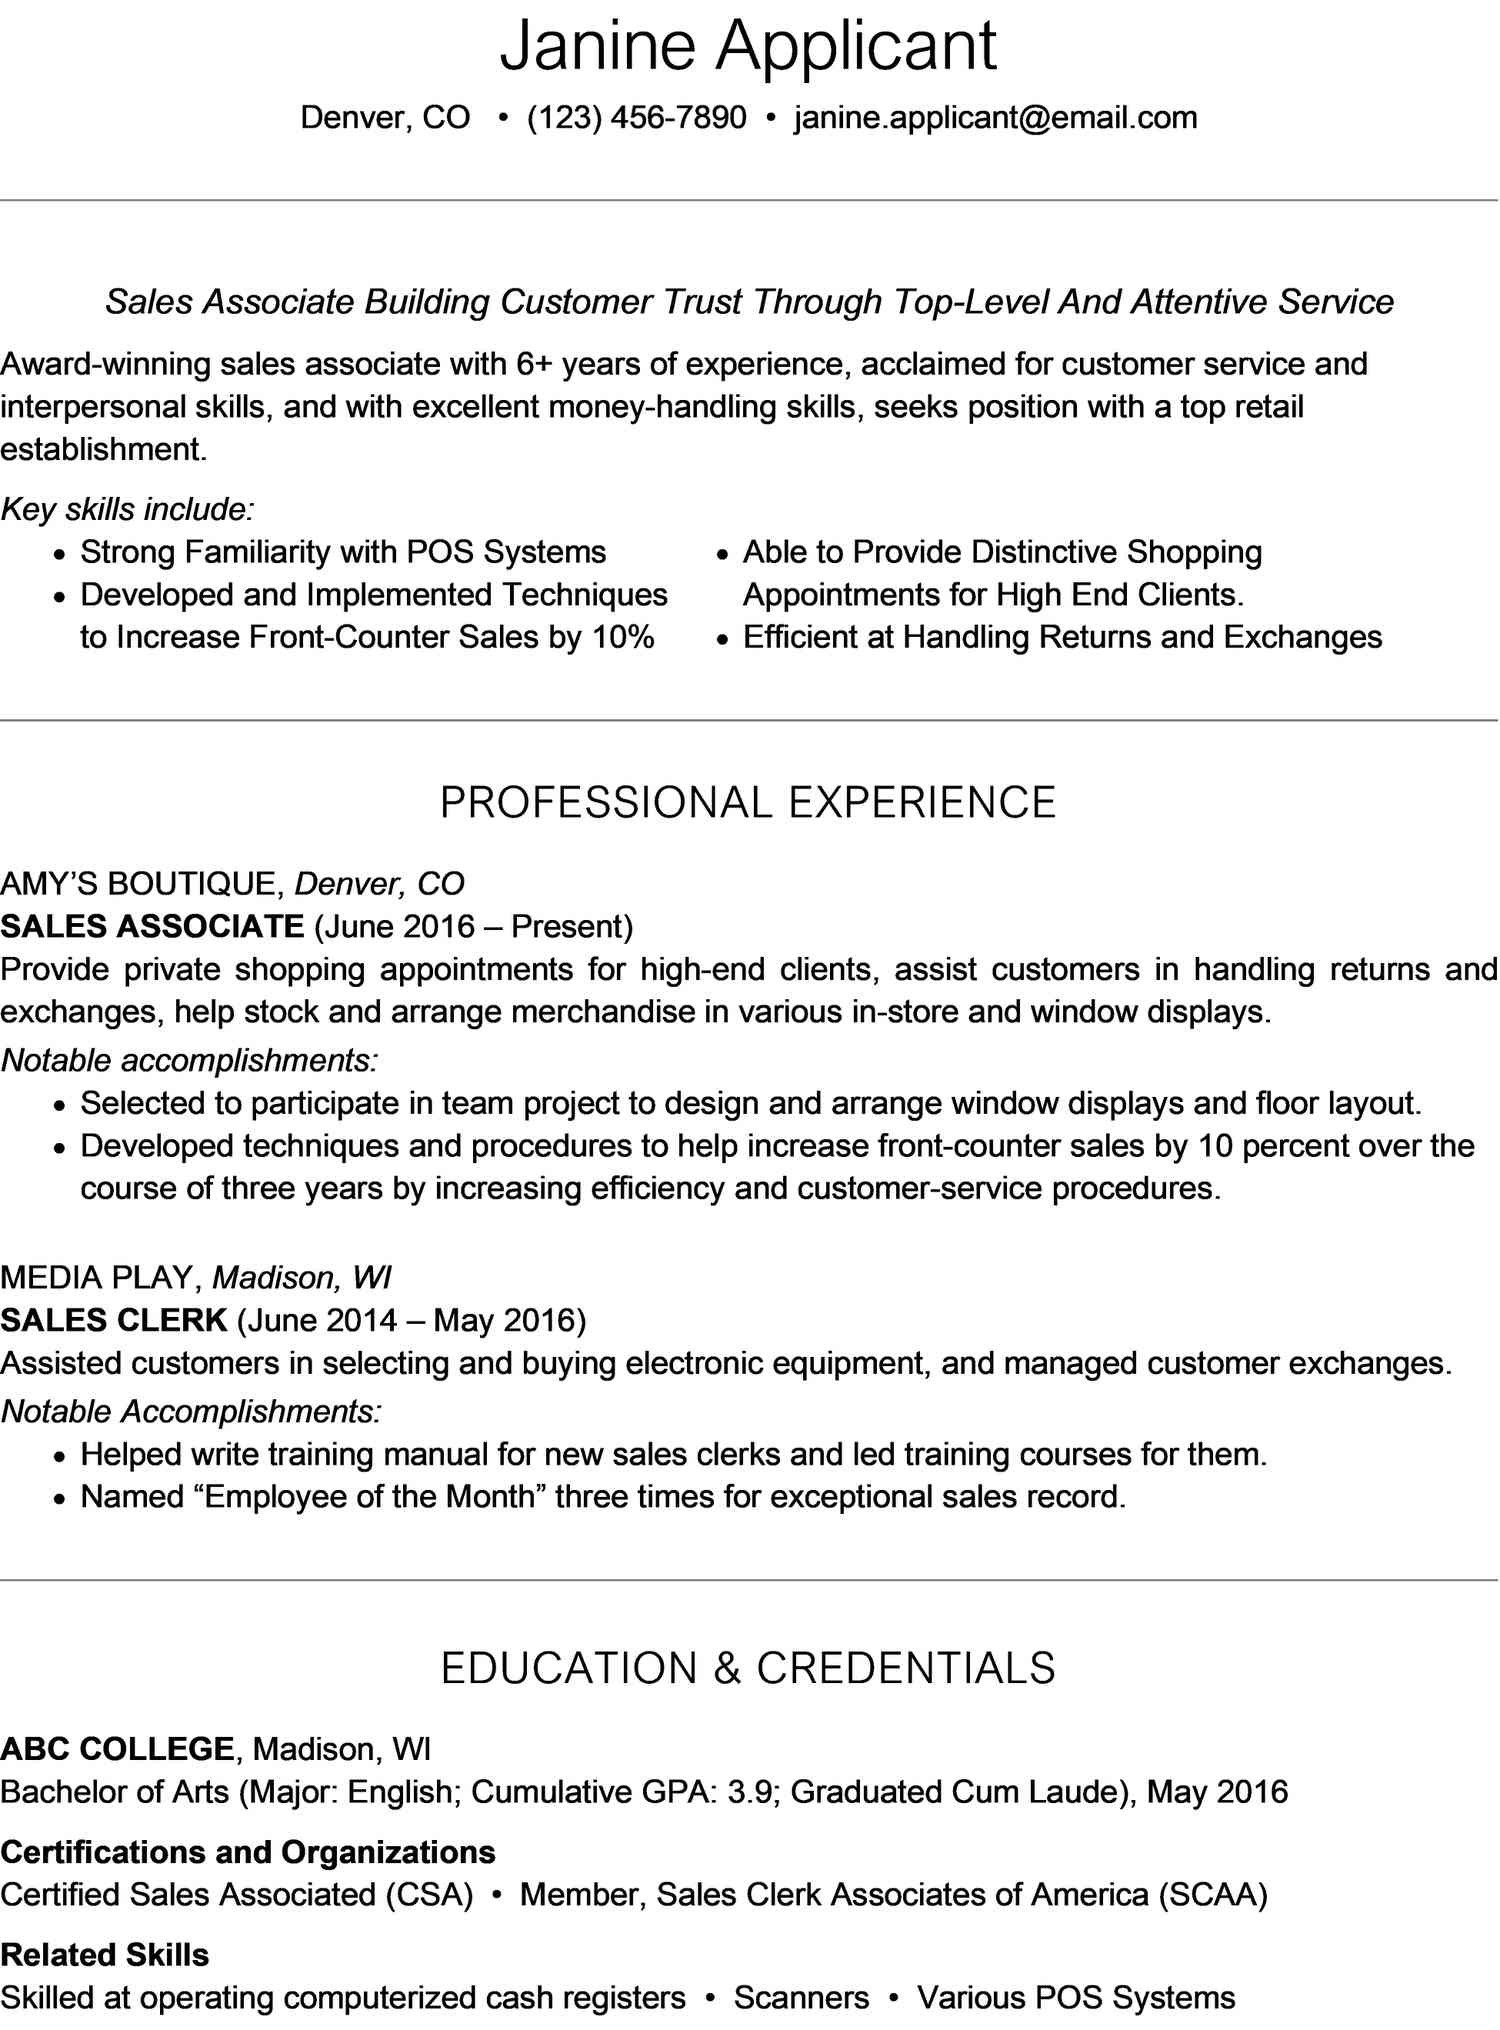 Sample Headlines for Resumes to Obtain How to Write A Resume Headline (with Examples)